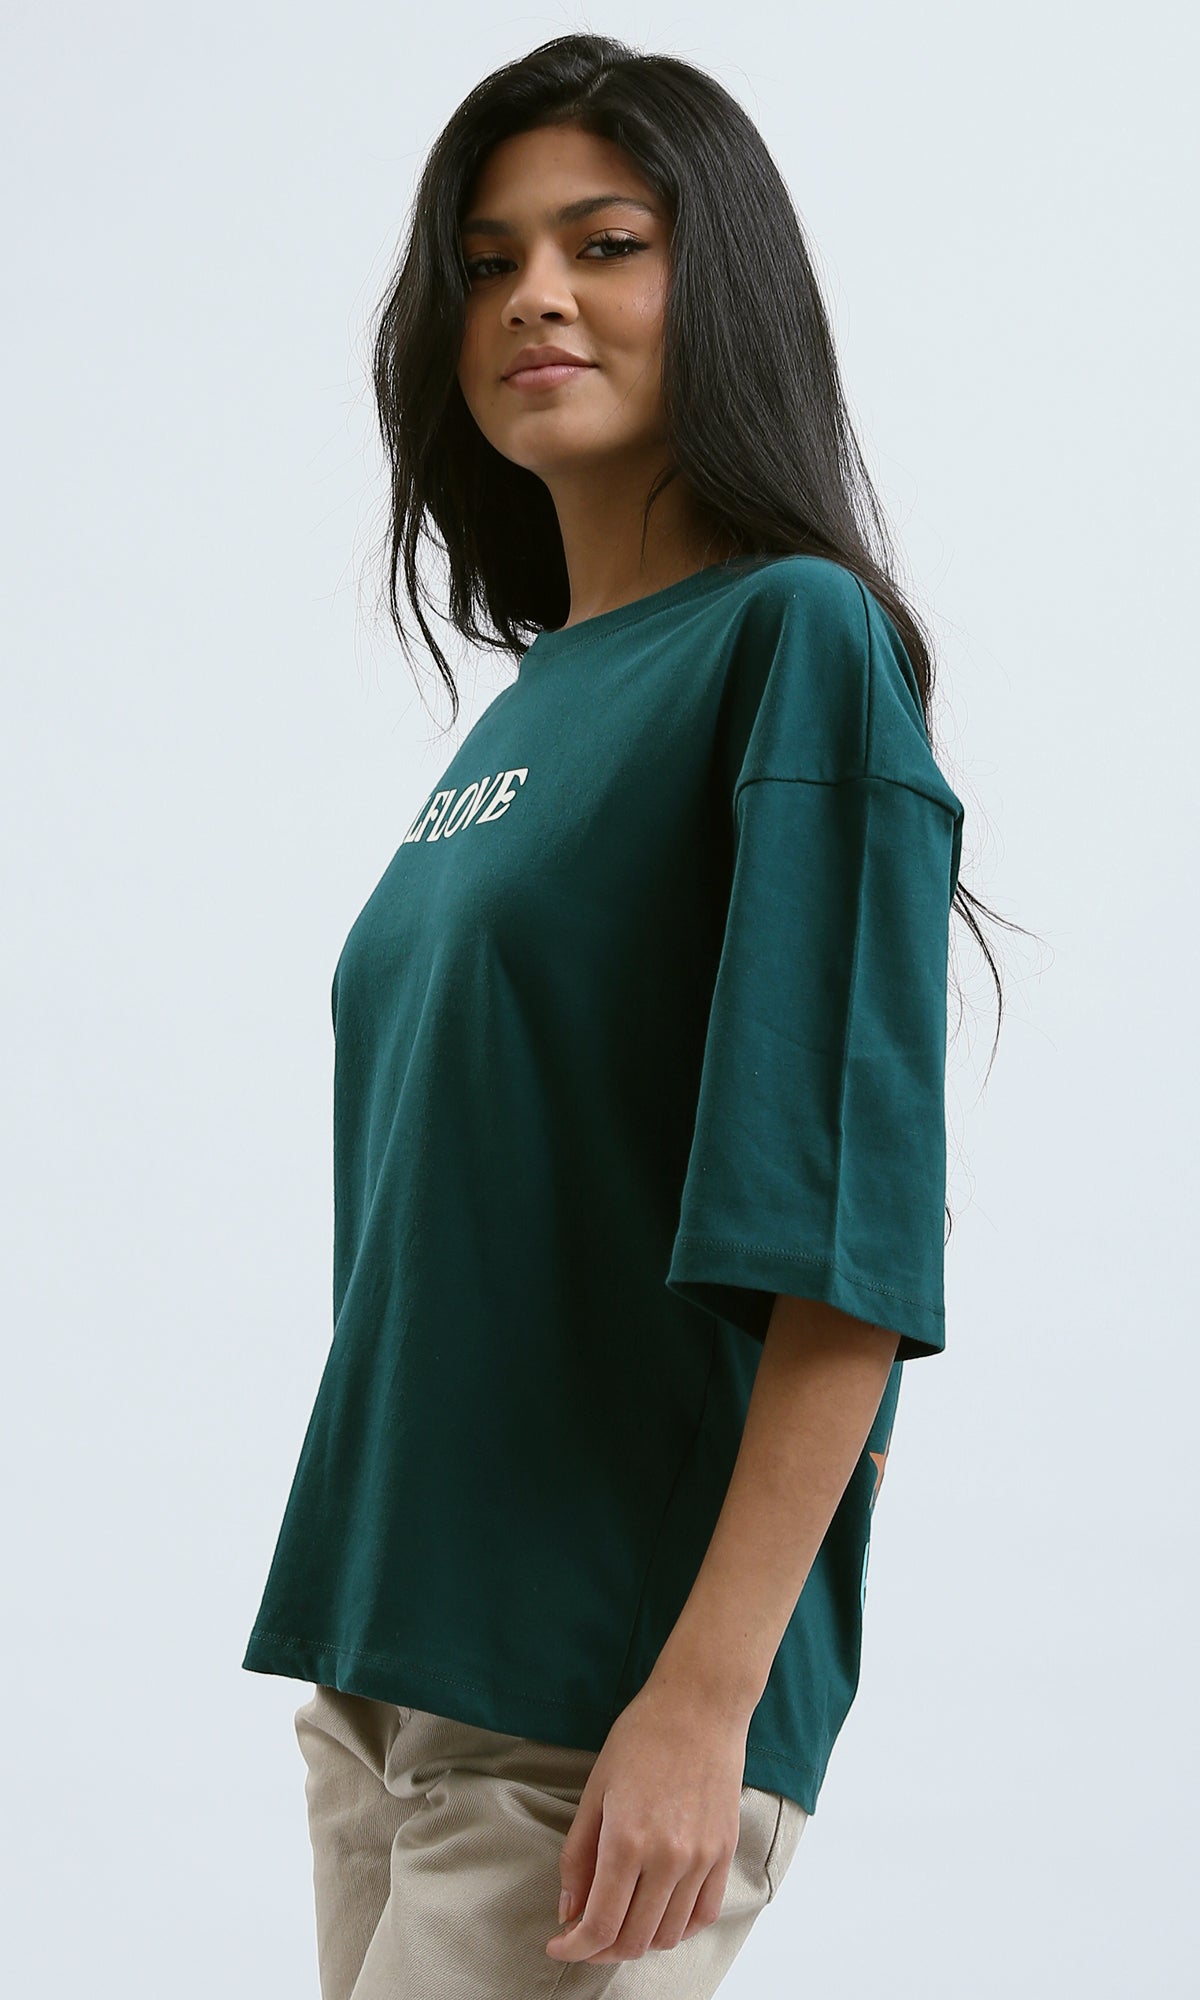 O189246 Relaxed Fit Printed "Self Love" Forest Green Tee